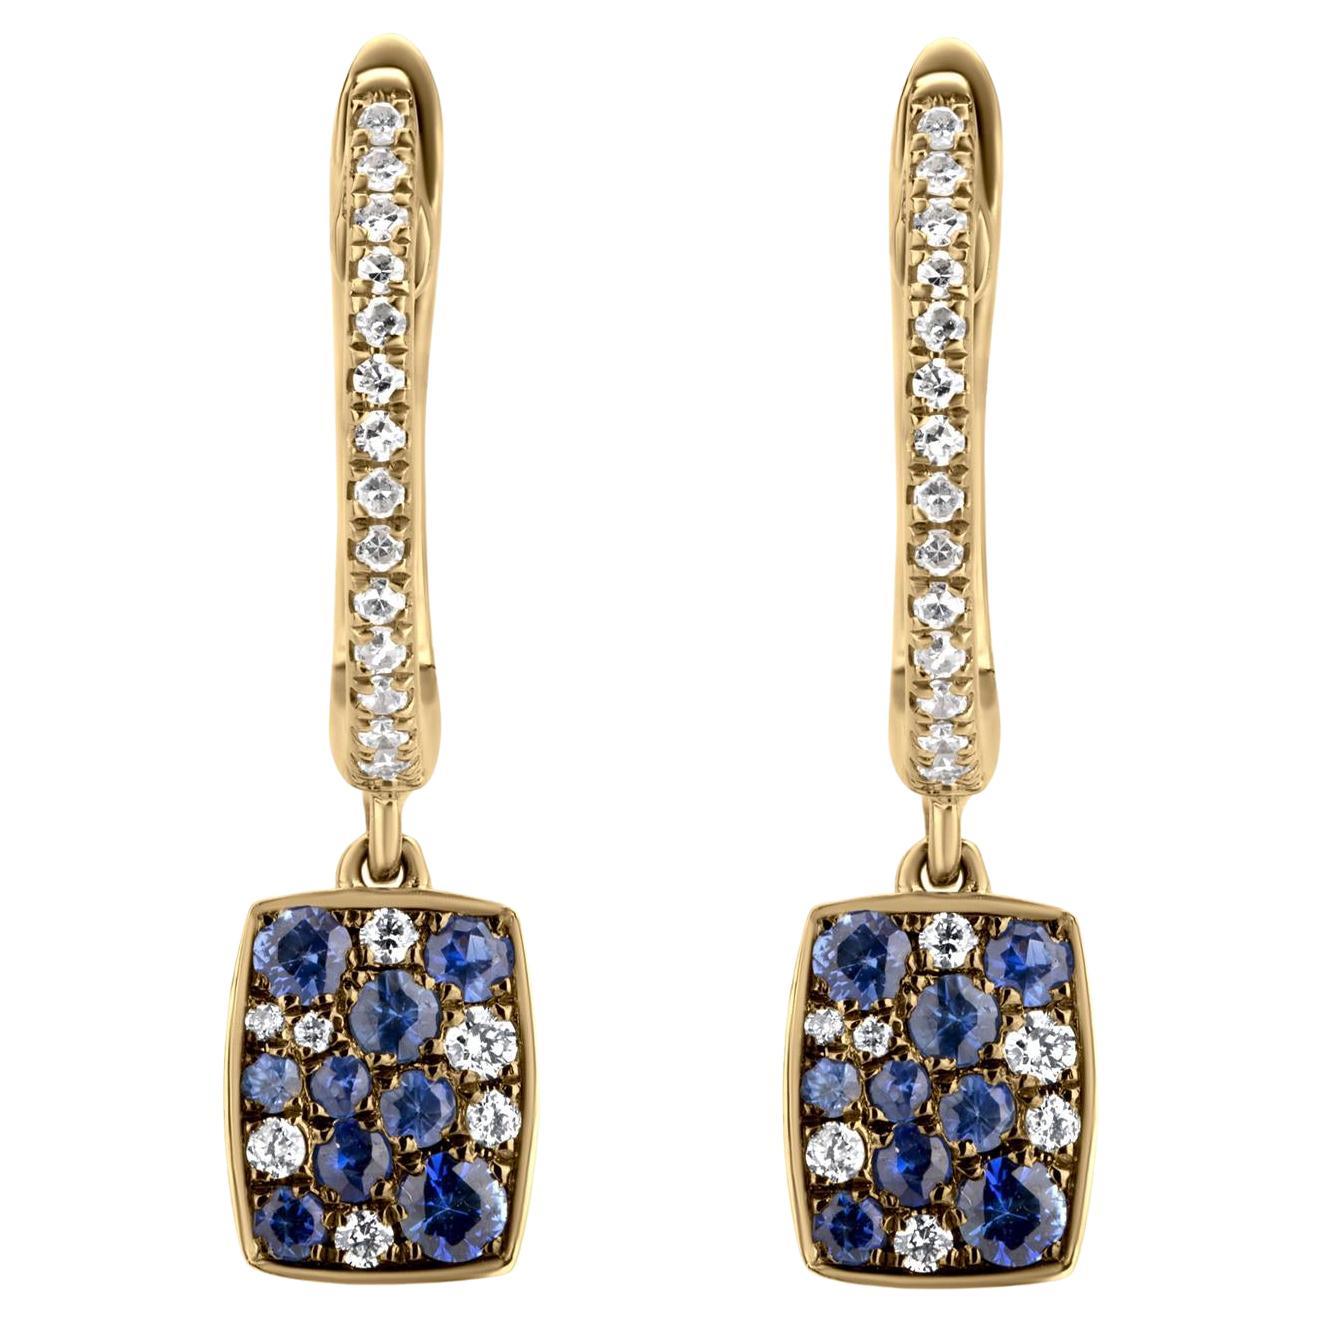 Yellow Gold Drop Earrings with Blue Sapphire Teardrops and Canary ...